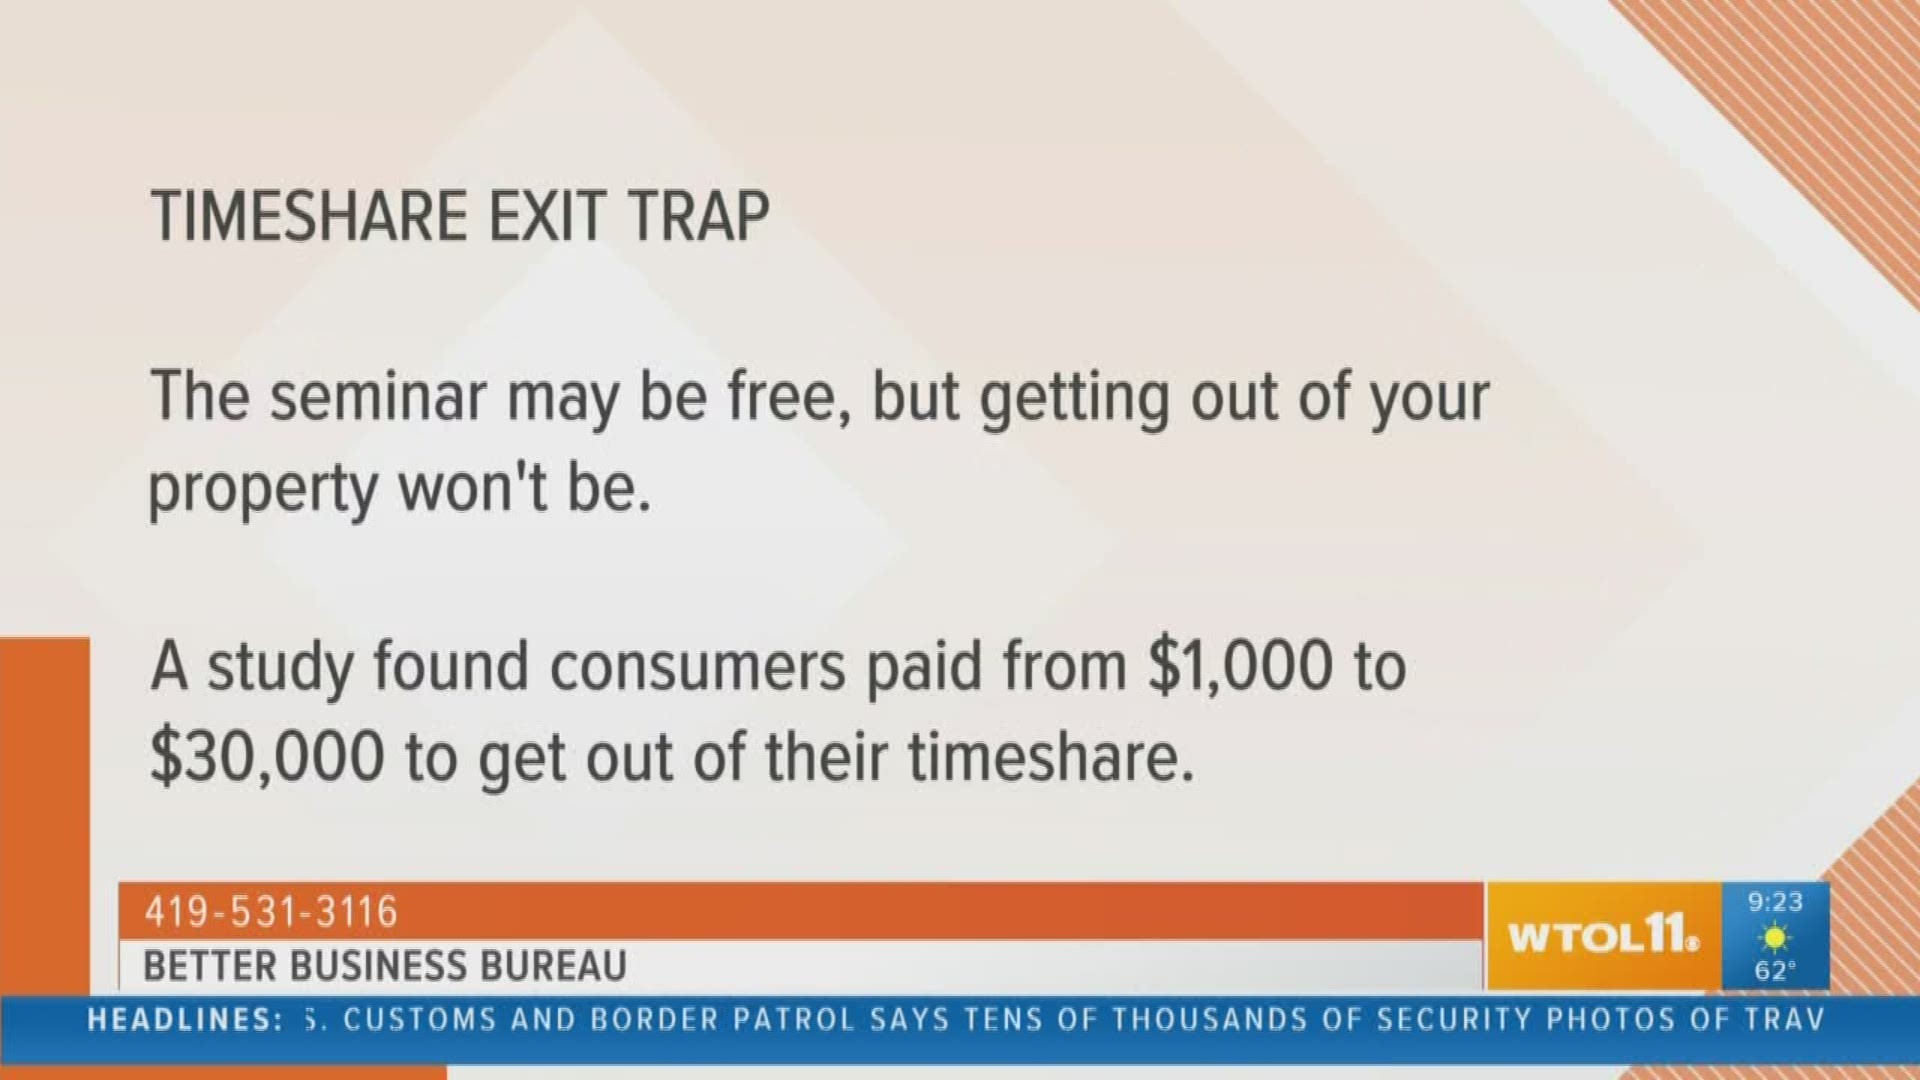 Stuck in a timeshare contract that you want to get out of? The BBB has time share relief operators with some advice.